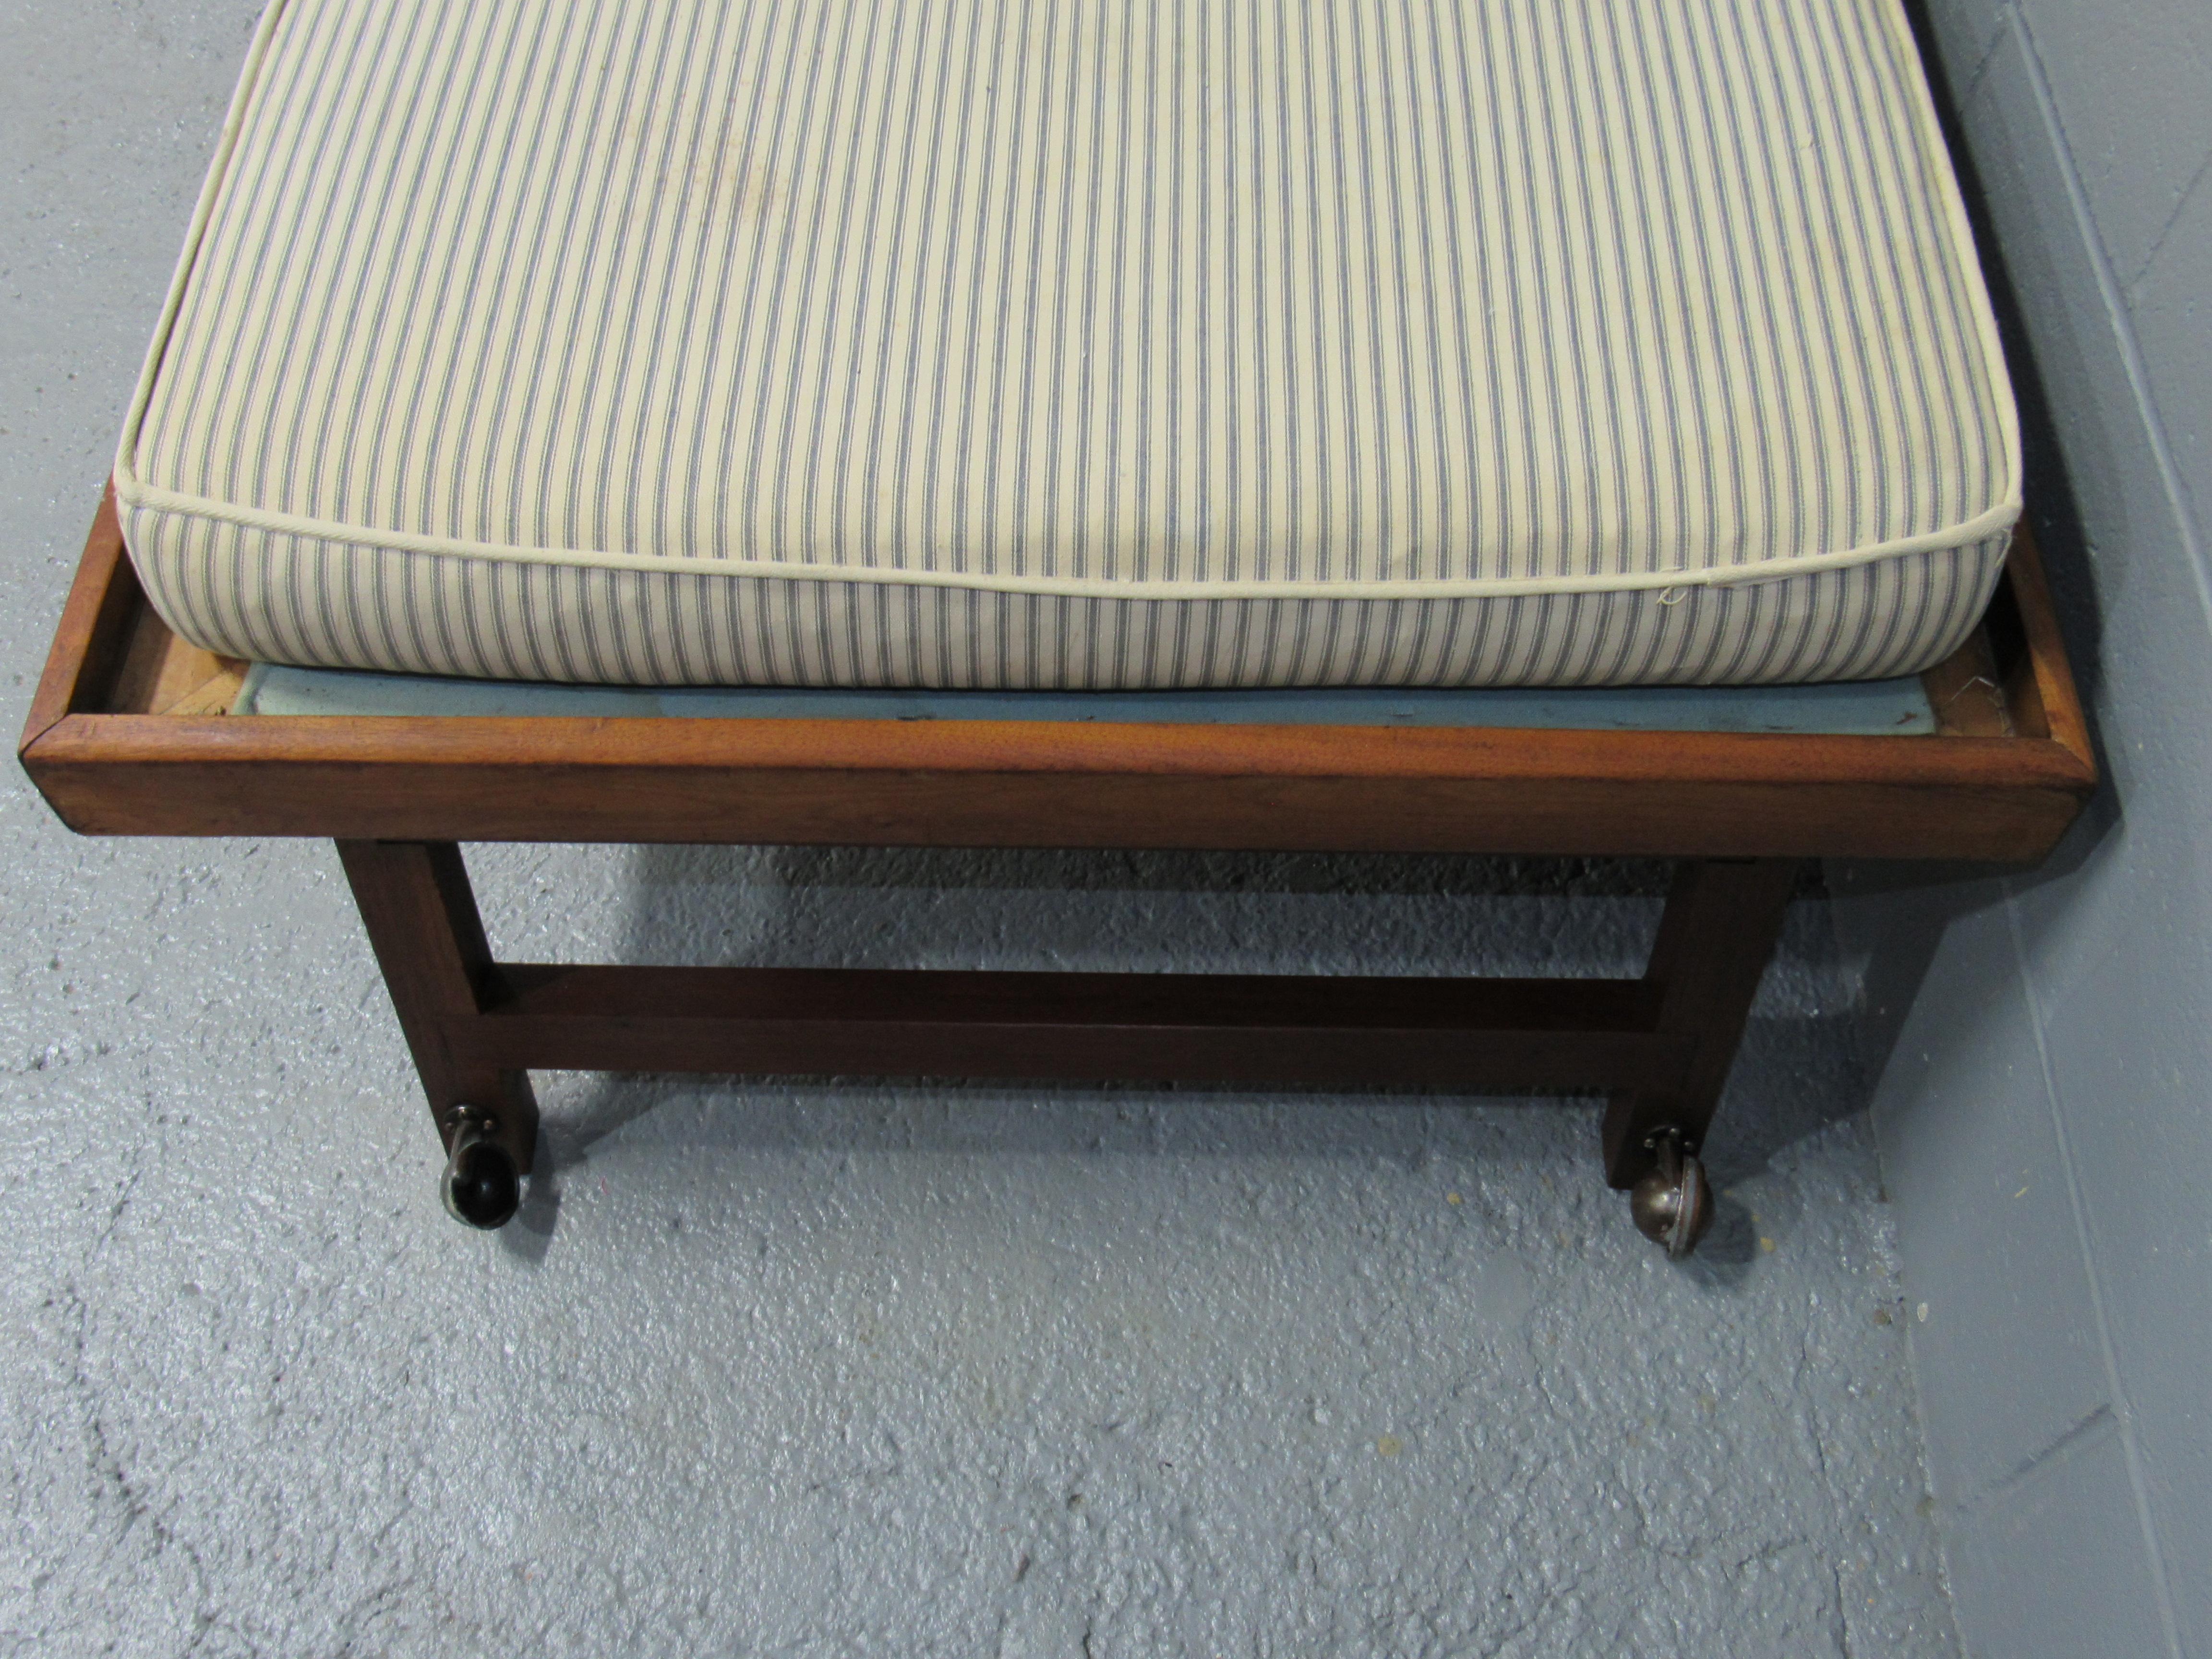 Solid walnut frame Mid-Century Modern sofa, day bed, pull out trundle bed by Design Research. Outstanding quality craftsmanship and nice graining in the solid walnut.